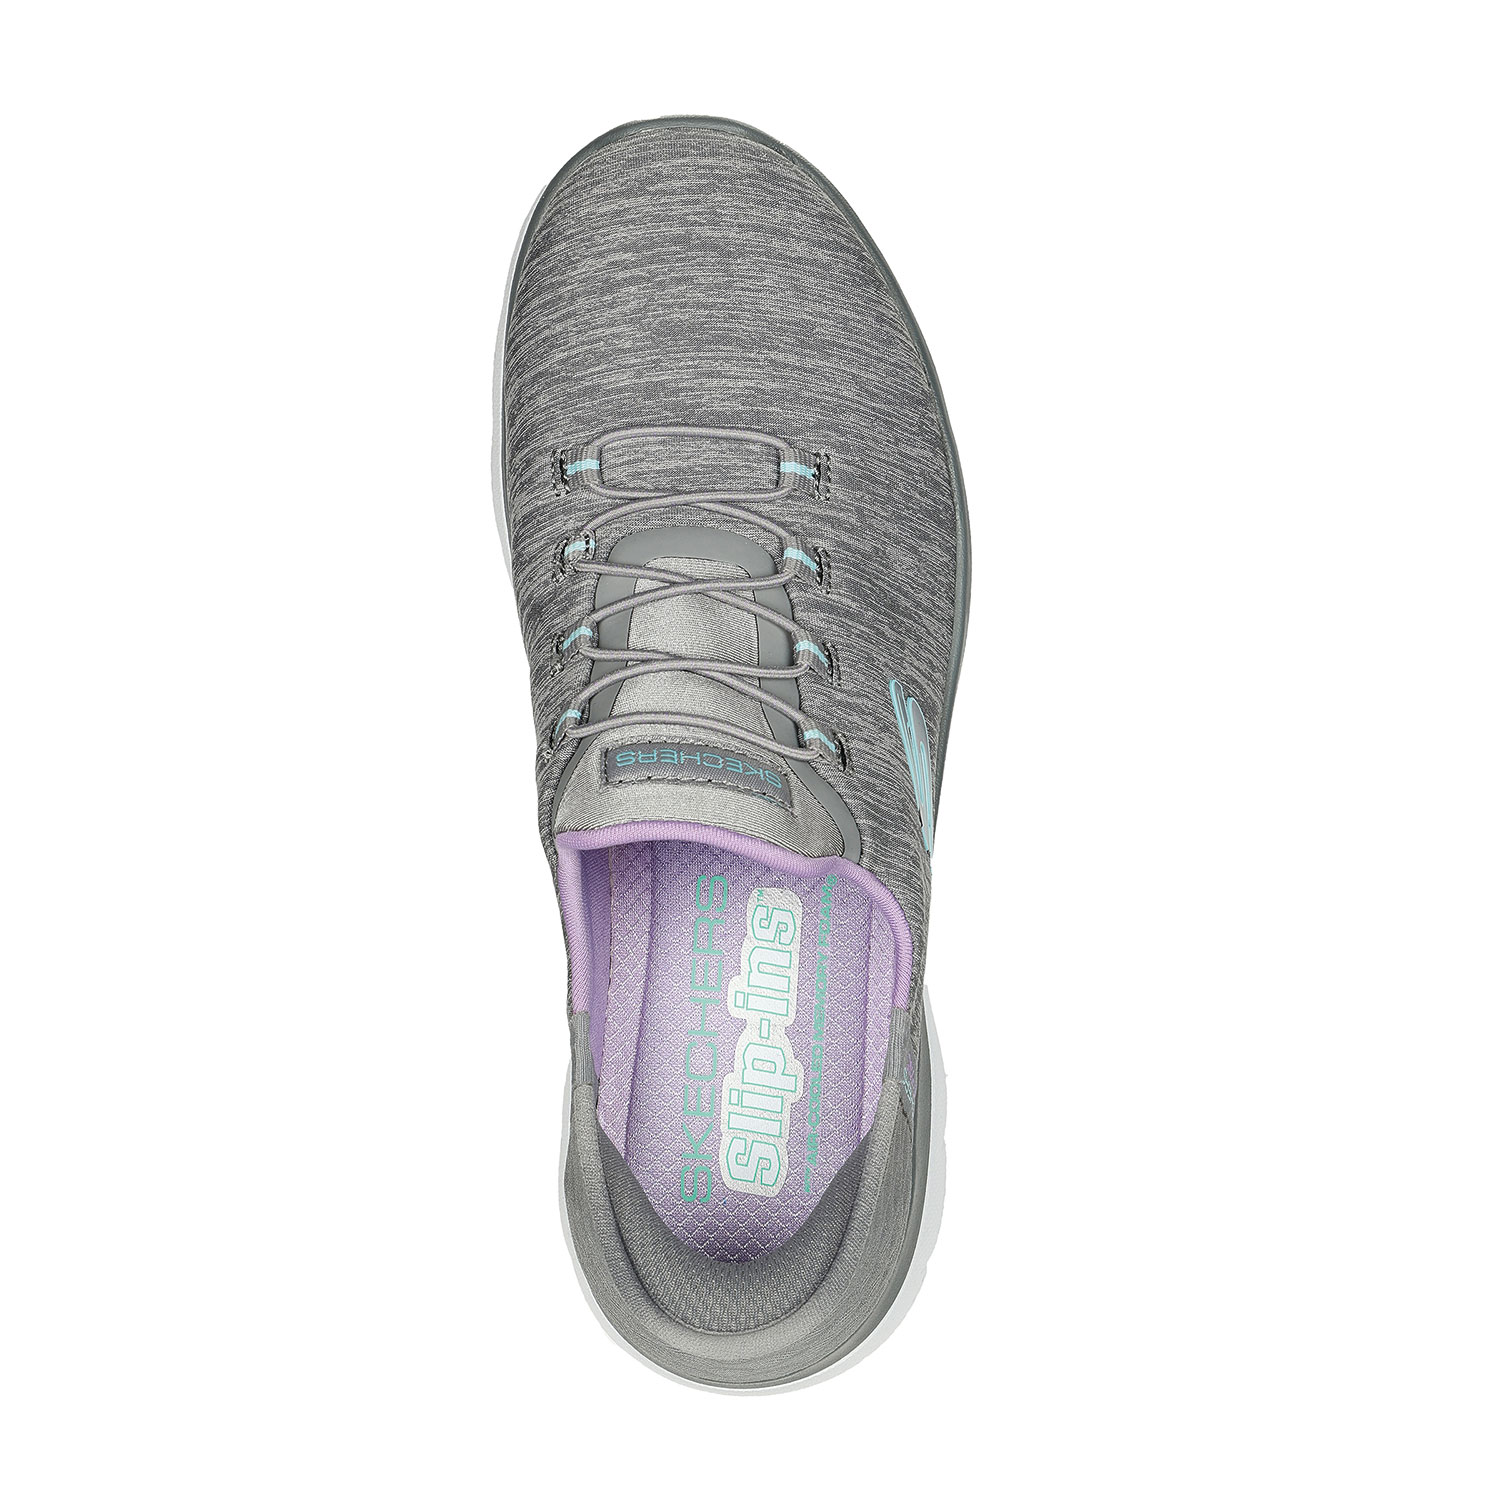 Product image for Skechers Summit Hands Free Slip-ins Dazzling Haze